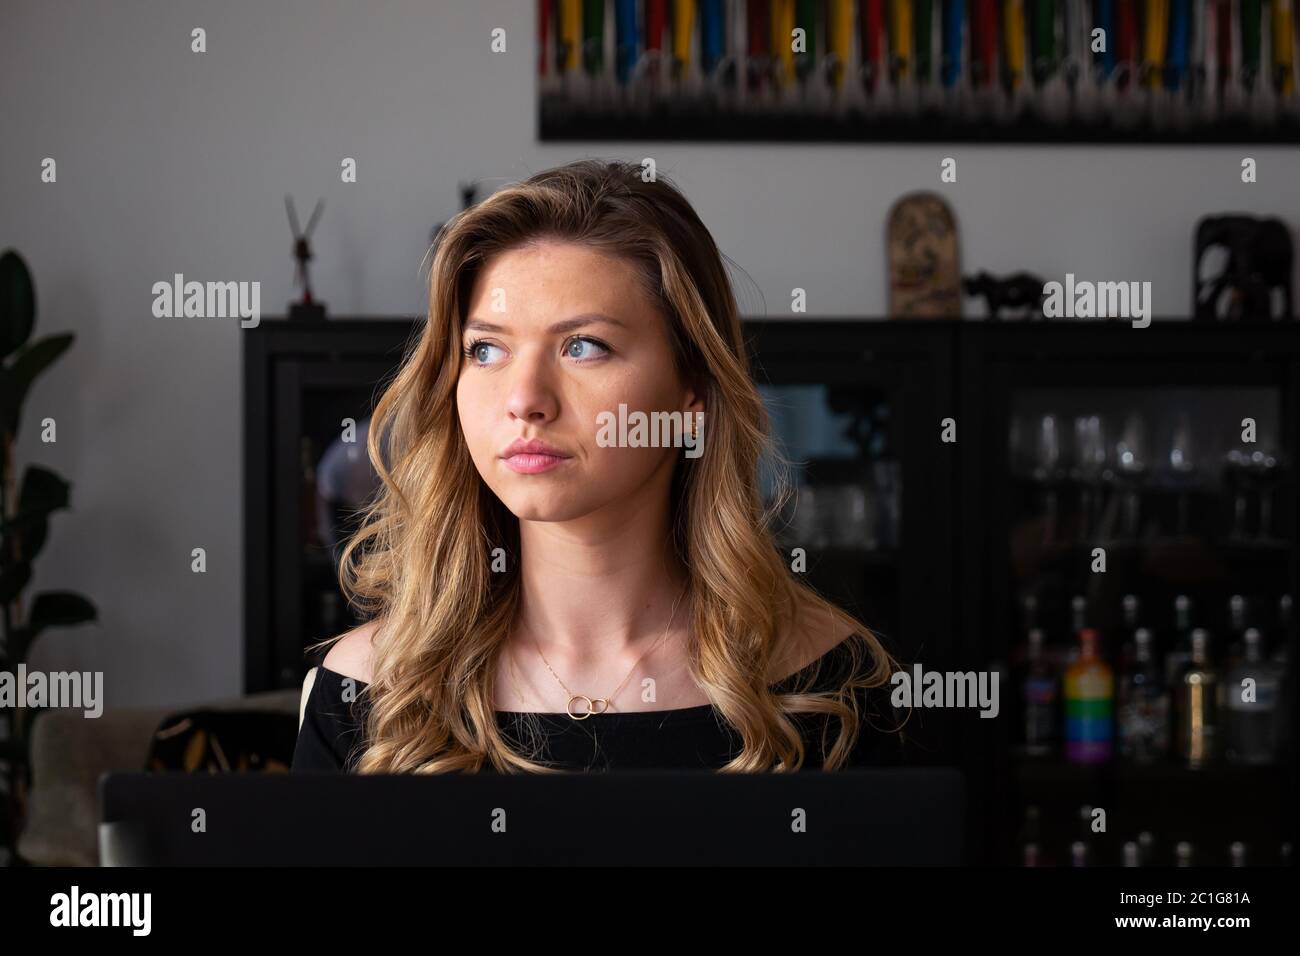 Young blond woman looking away thinking in living room. Medium shot. Stock Photo